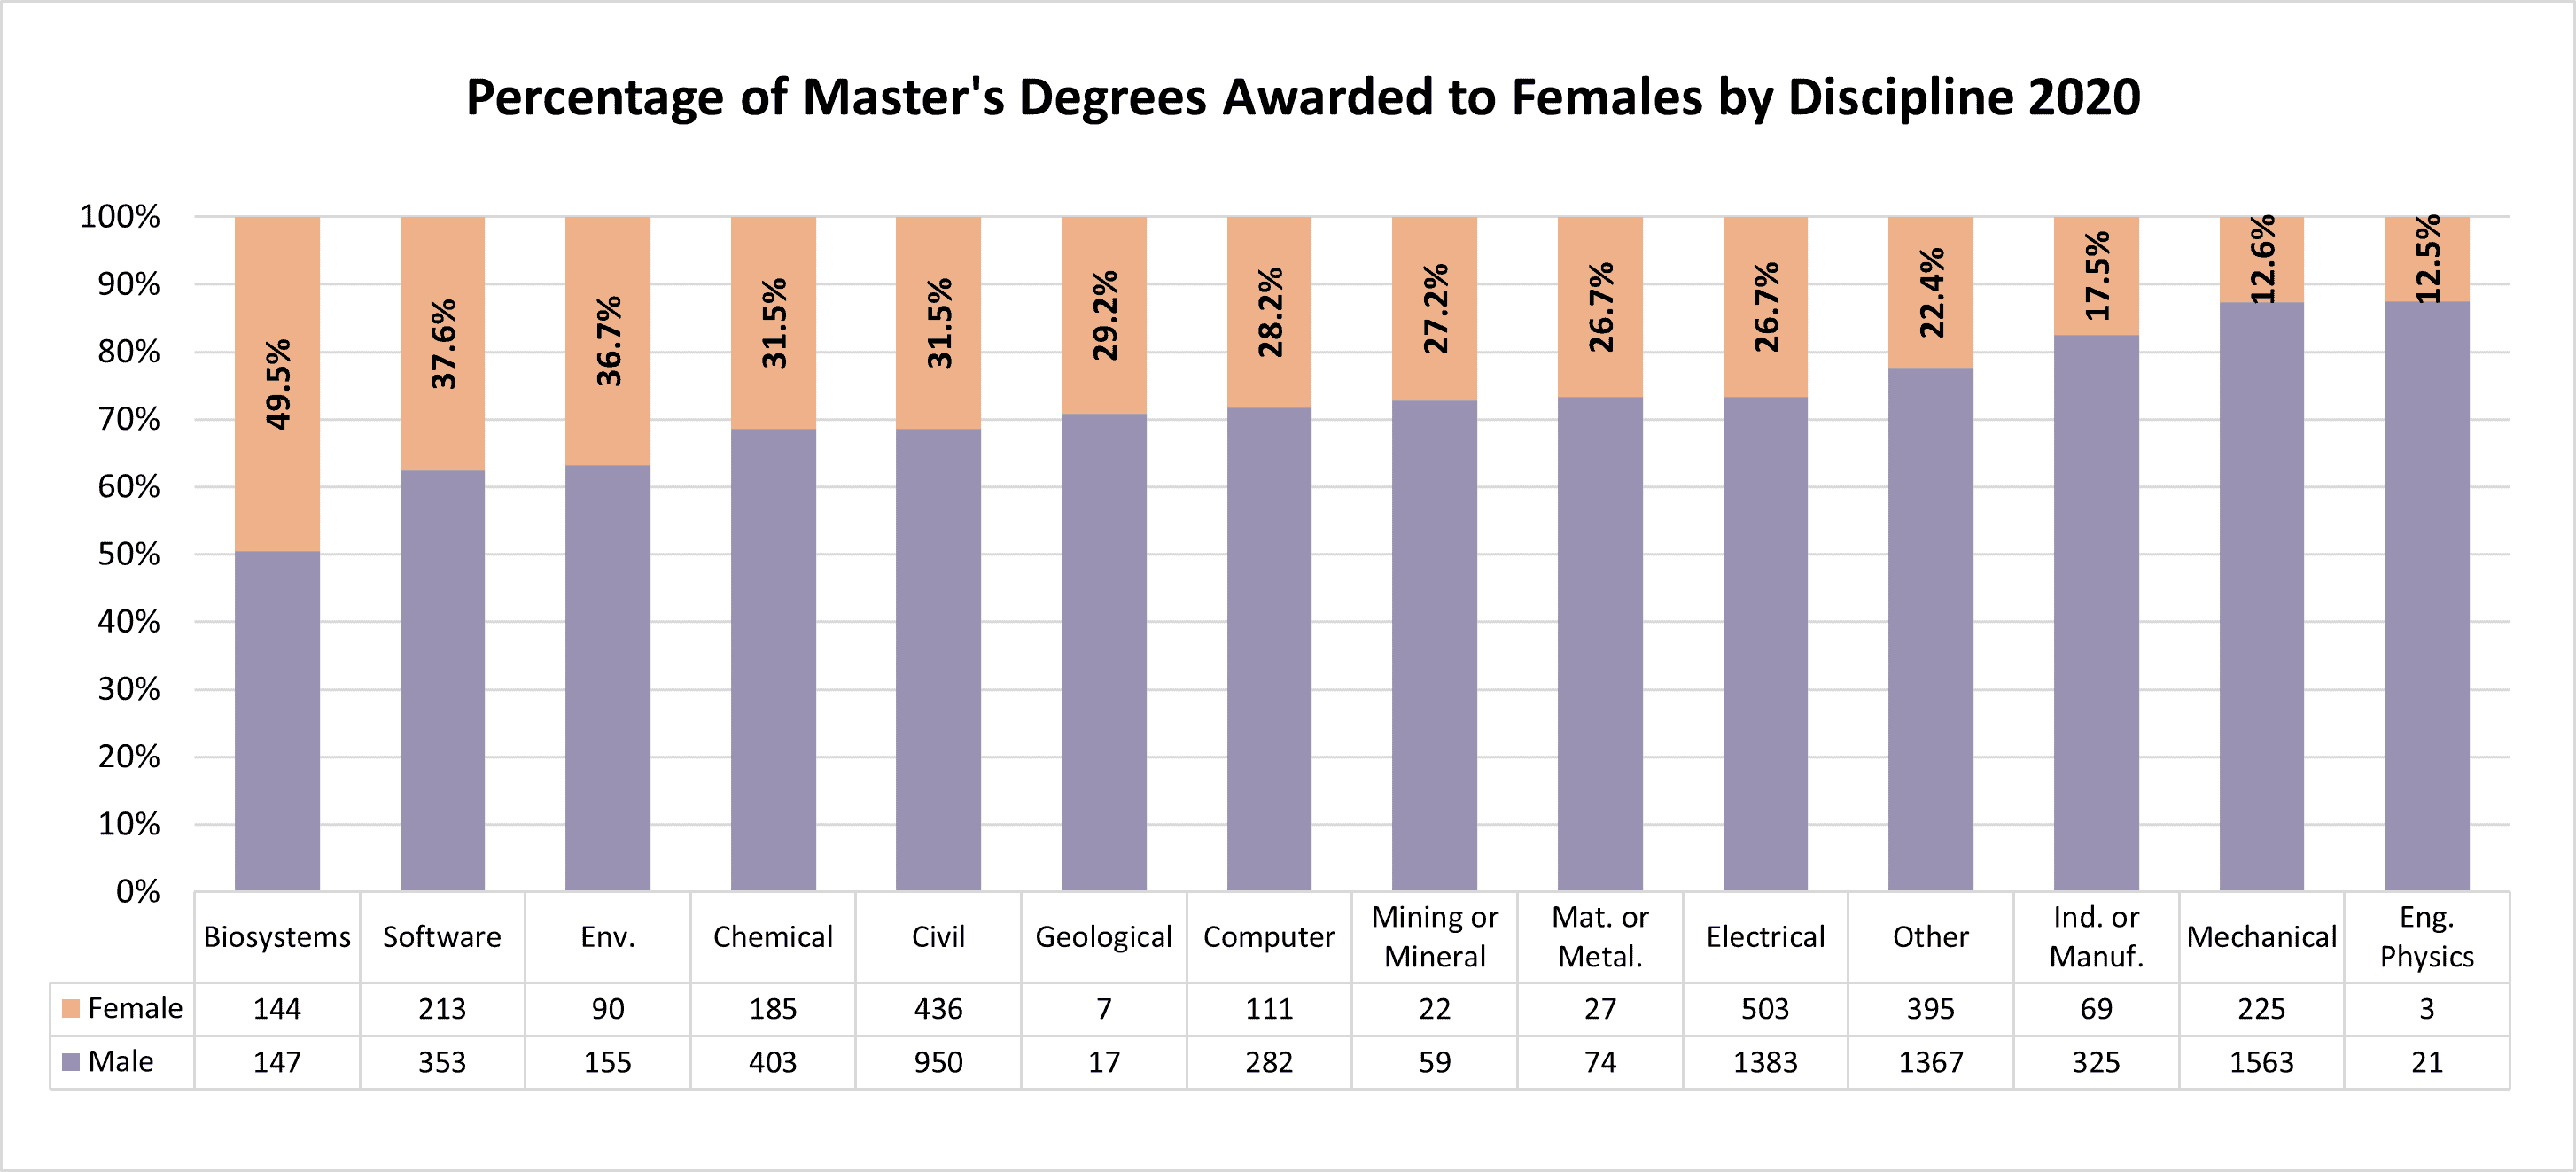 Percentage of Master's degrees awarded to females by discipline 2020